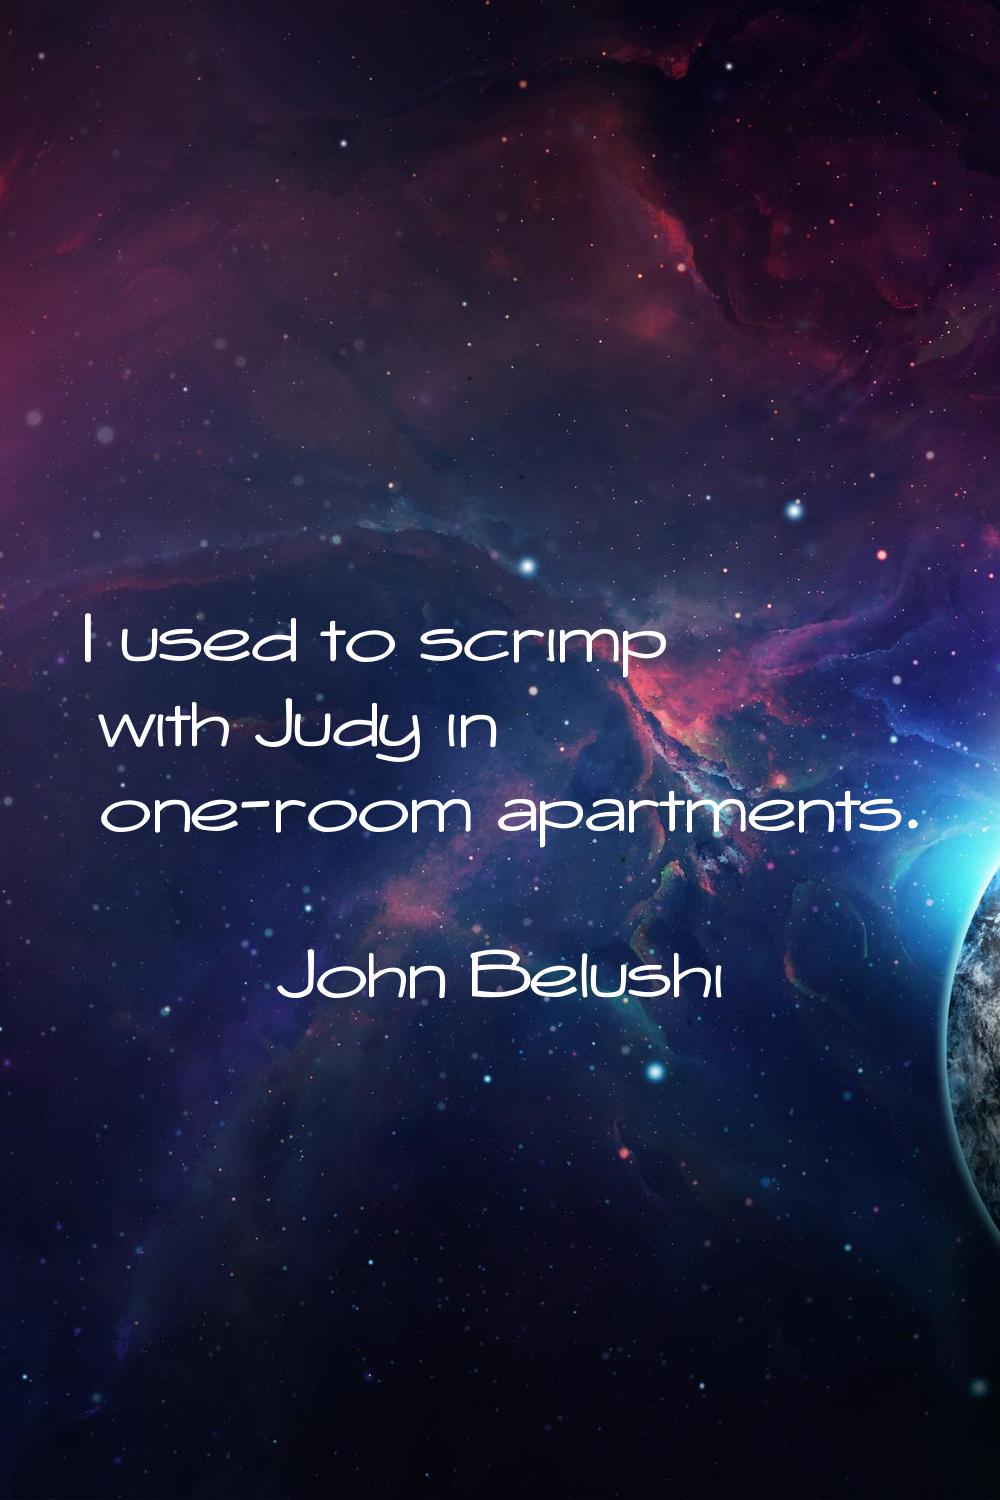 I used to scrimp with Judy in one-room apartments.